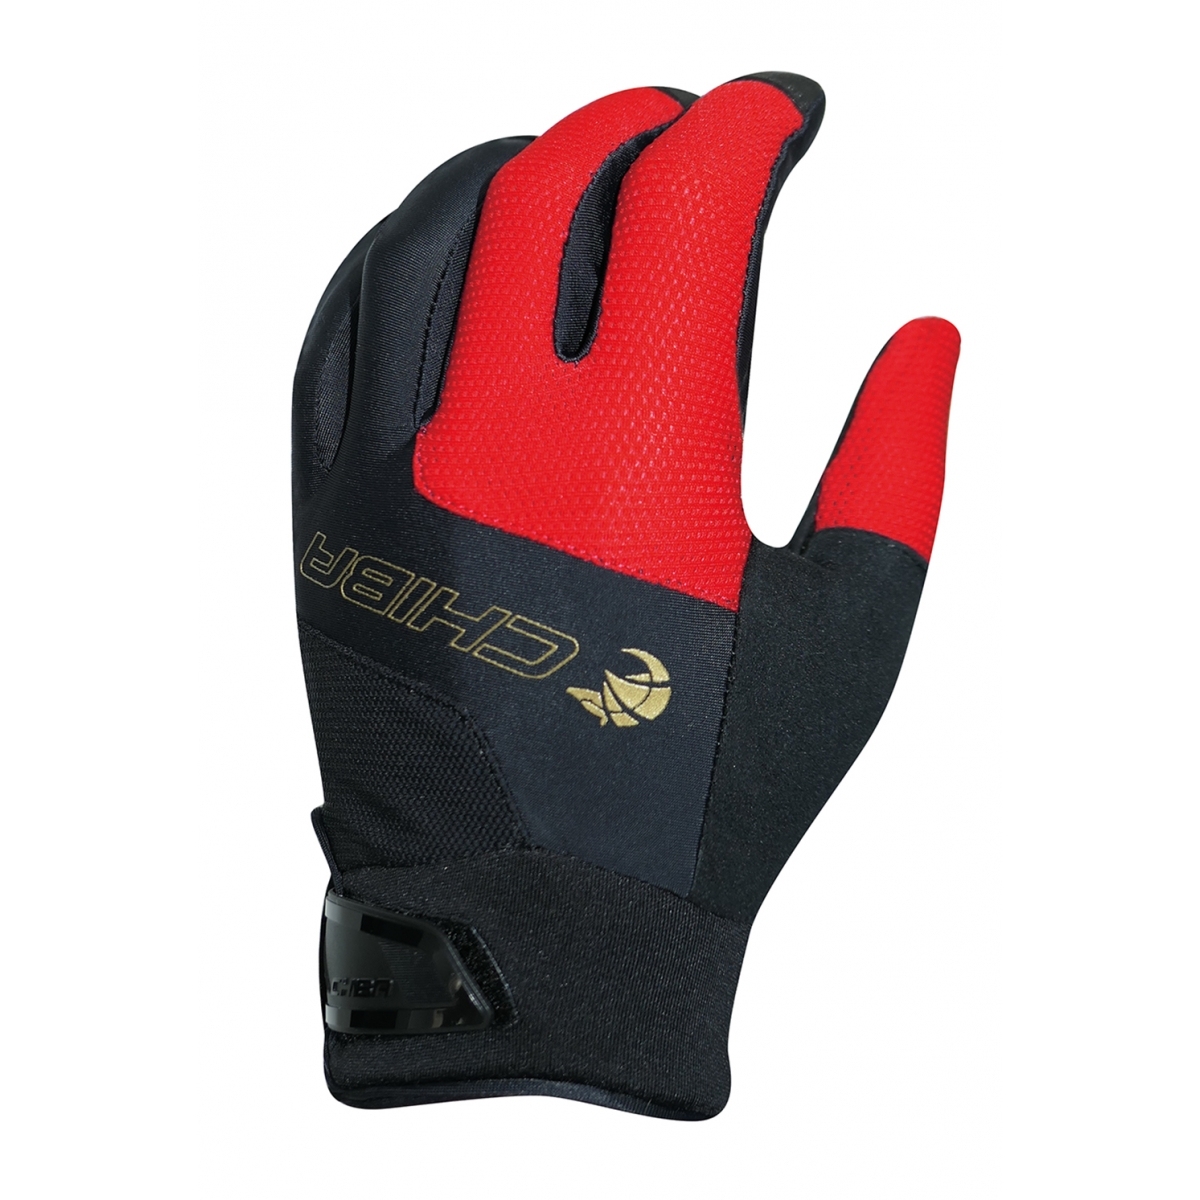 Image of Chiba Viper Cycling Gloves - red